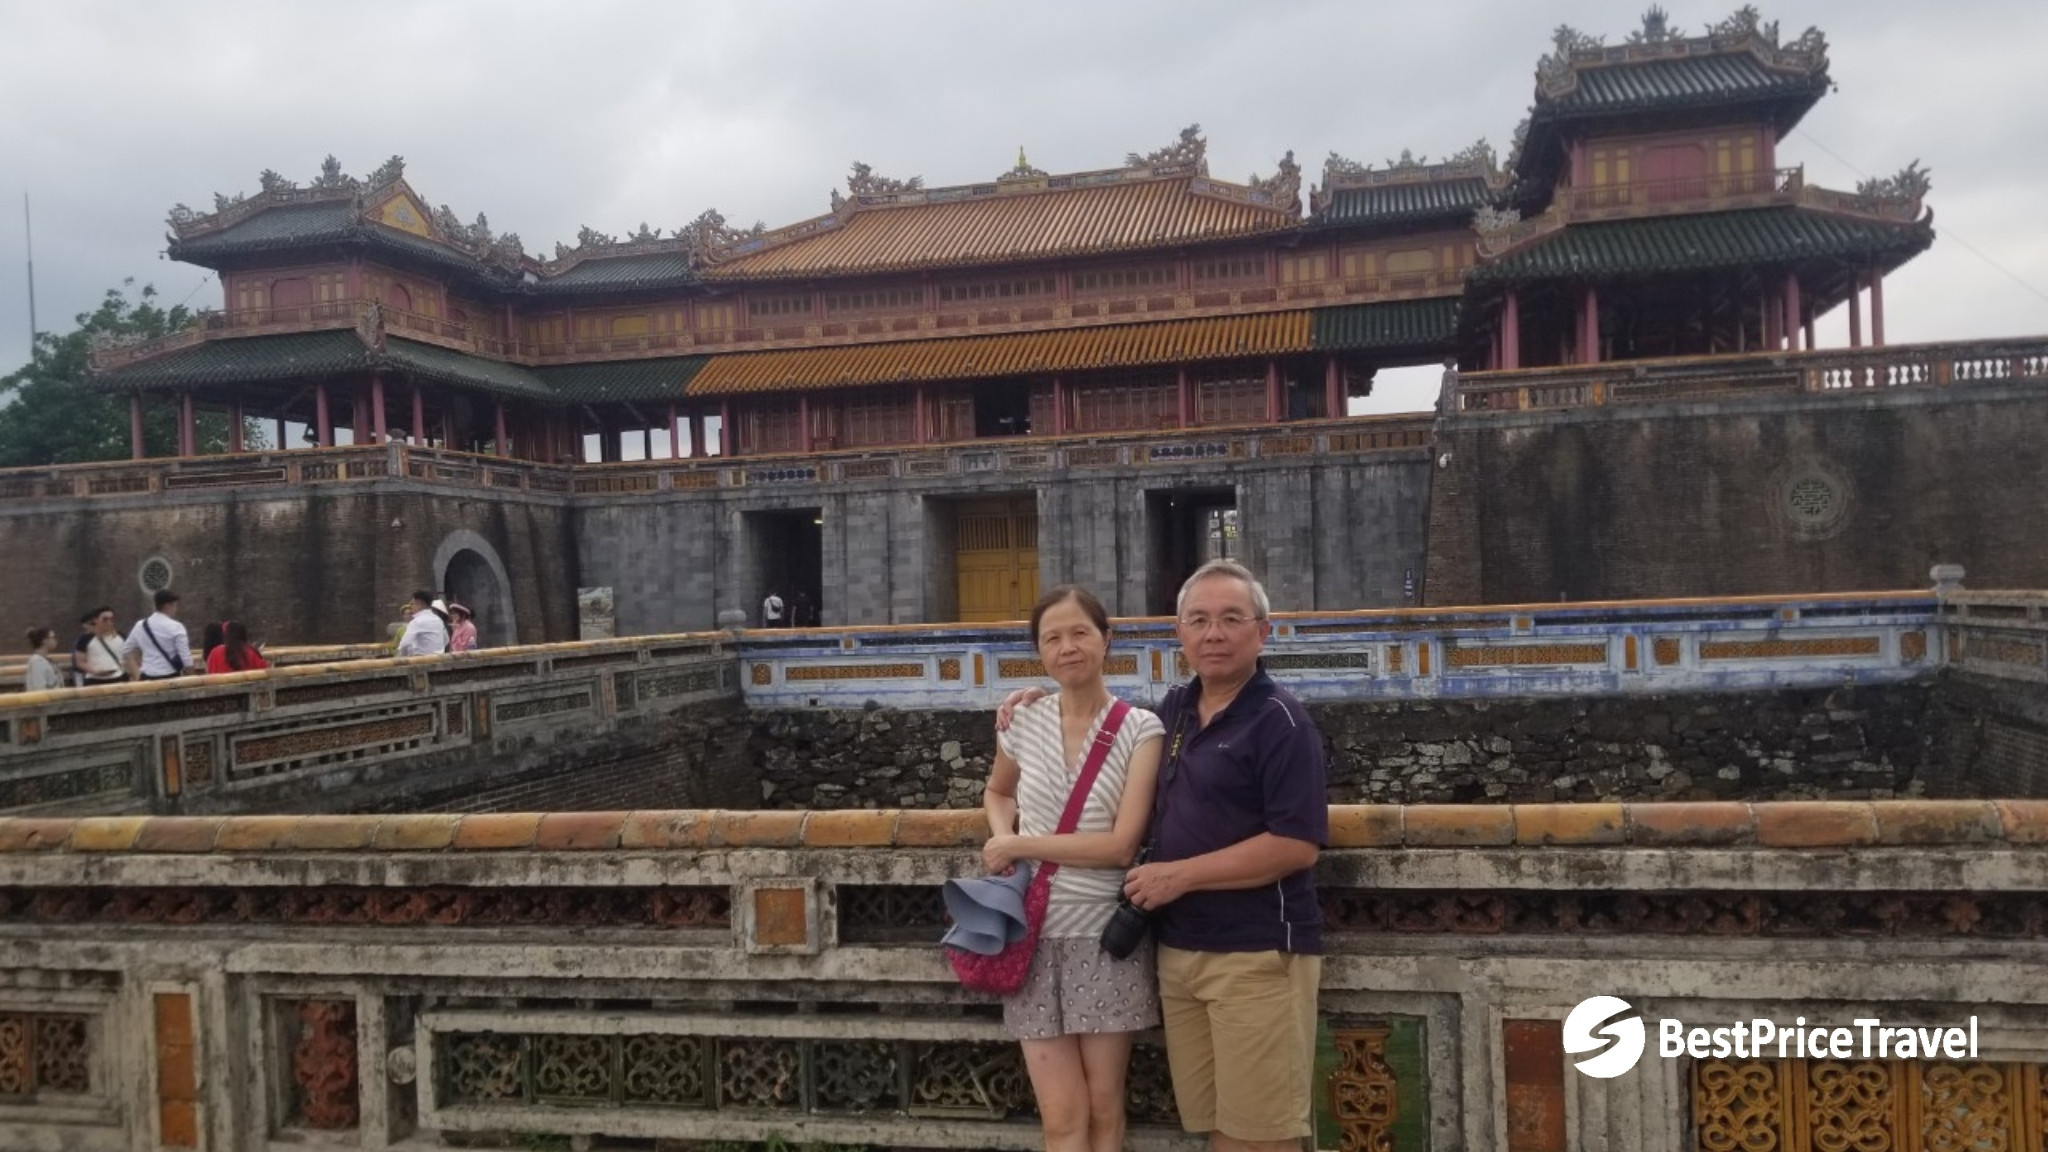 Day 11 Take In The Sense Of The Past At Hue Imperial Citadel